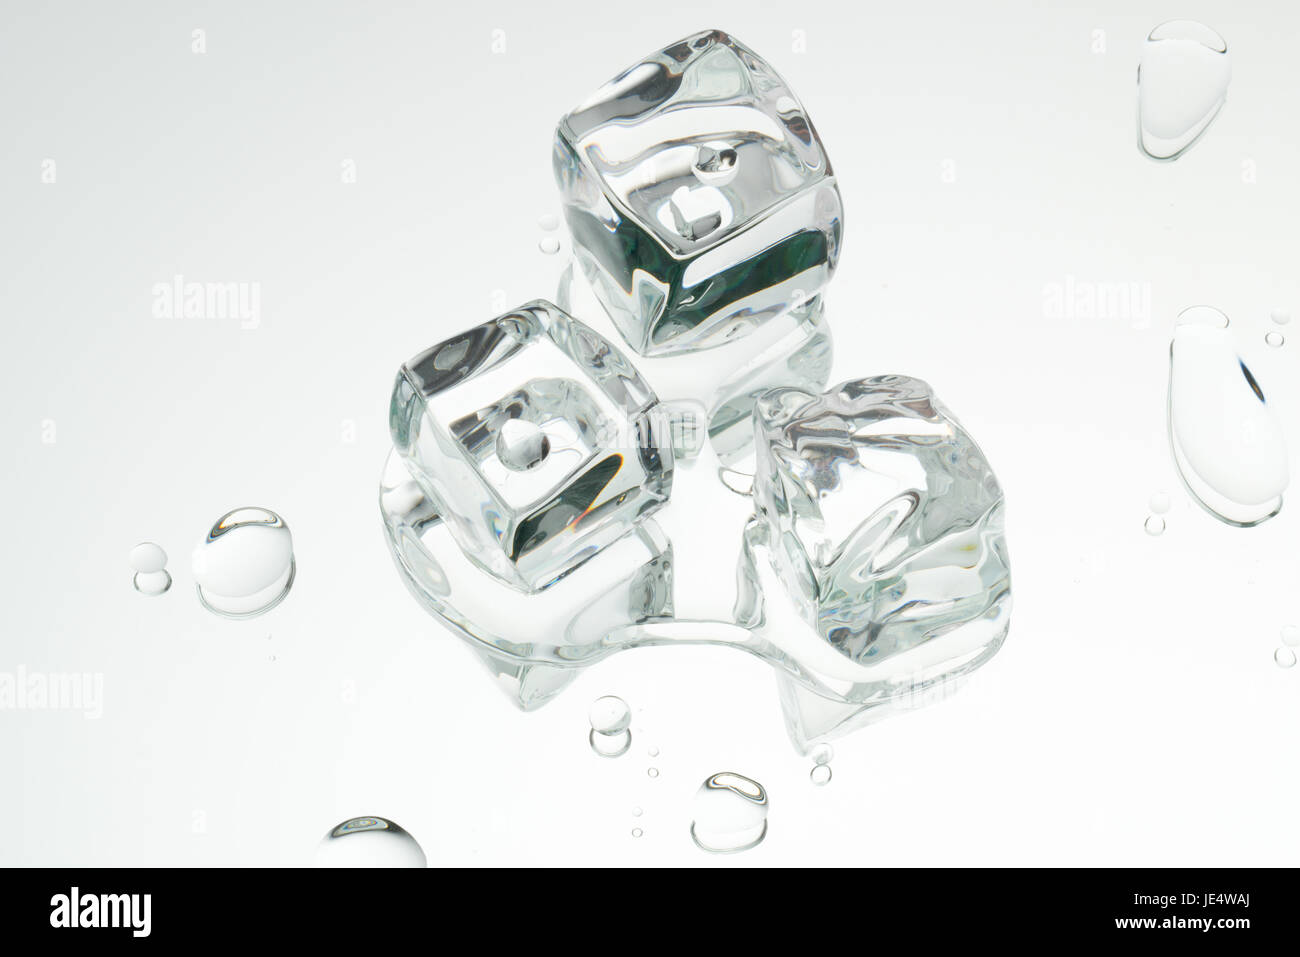 Acrylic ice cubes and drops of water. Stock Photo